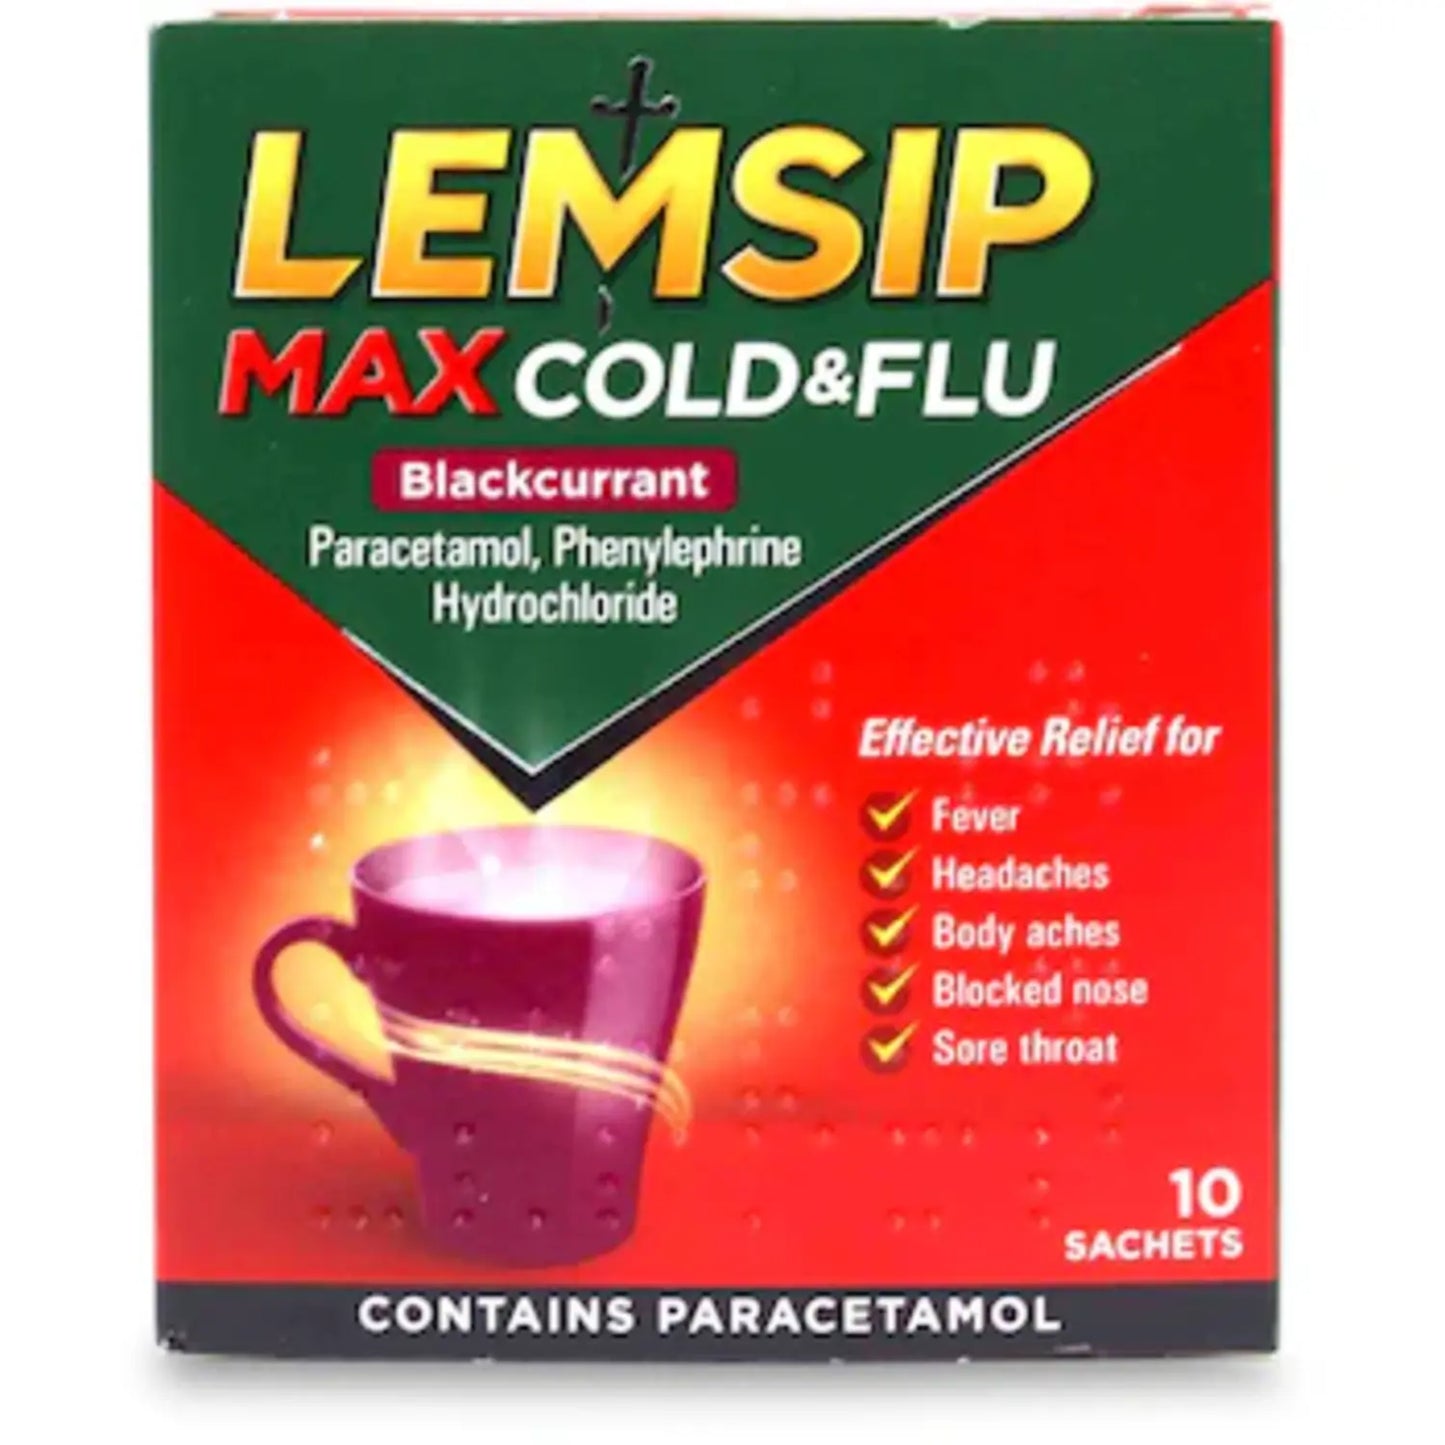 Lemsip Max Cold And Flu Blackcurrant- 5 Sachets